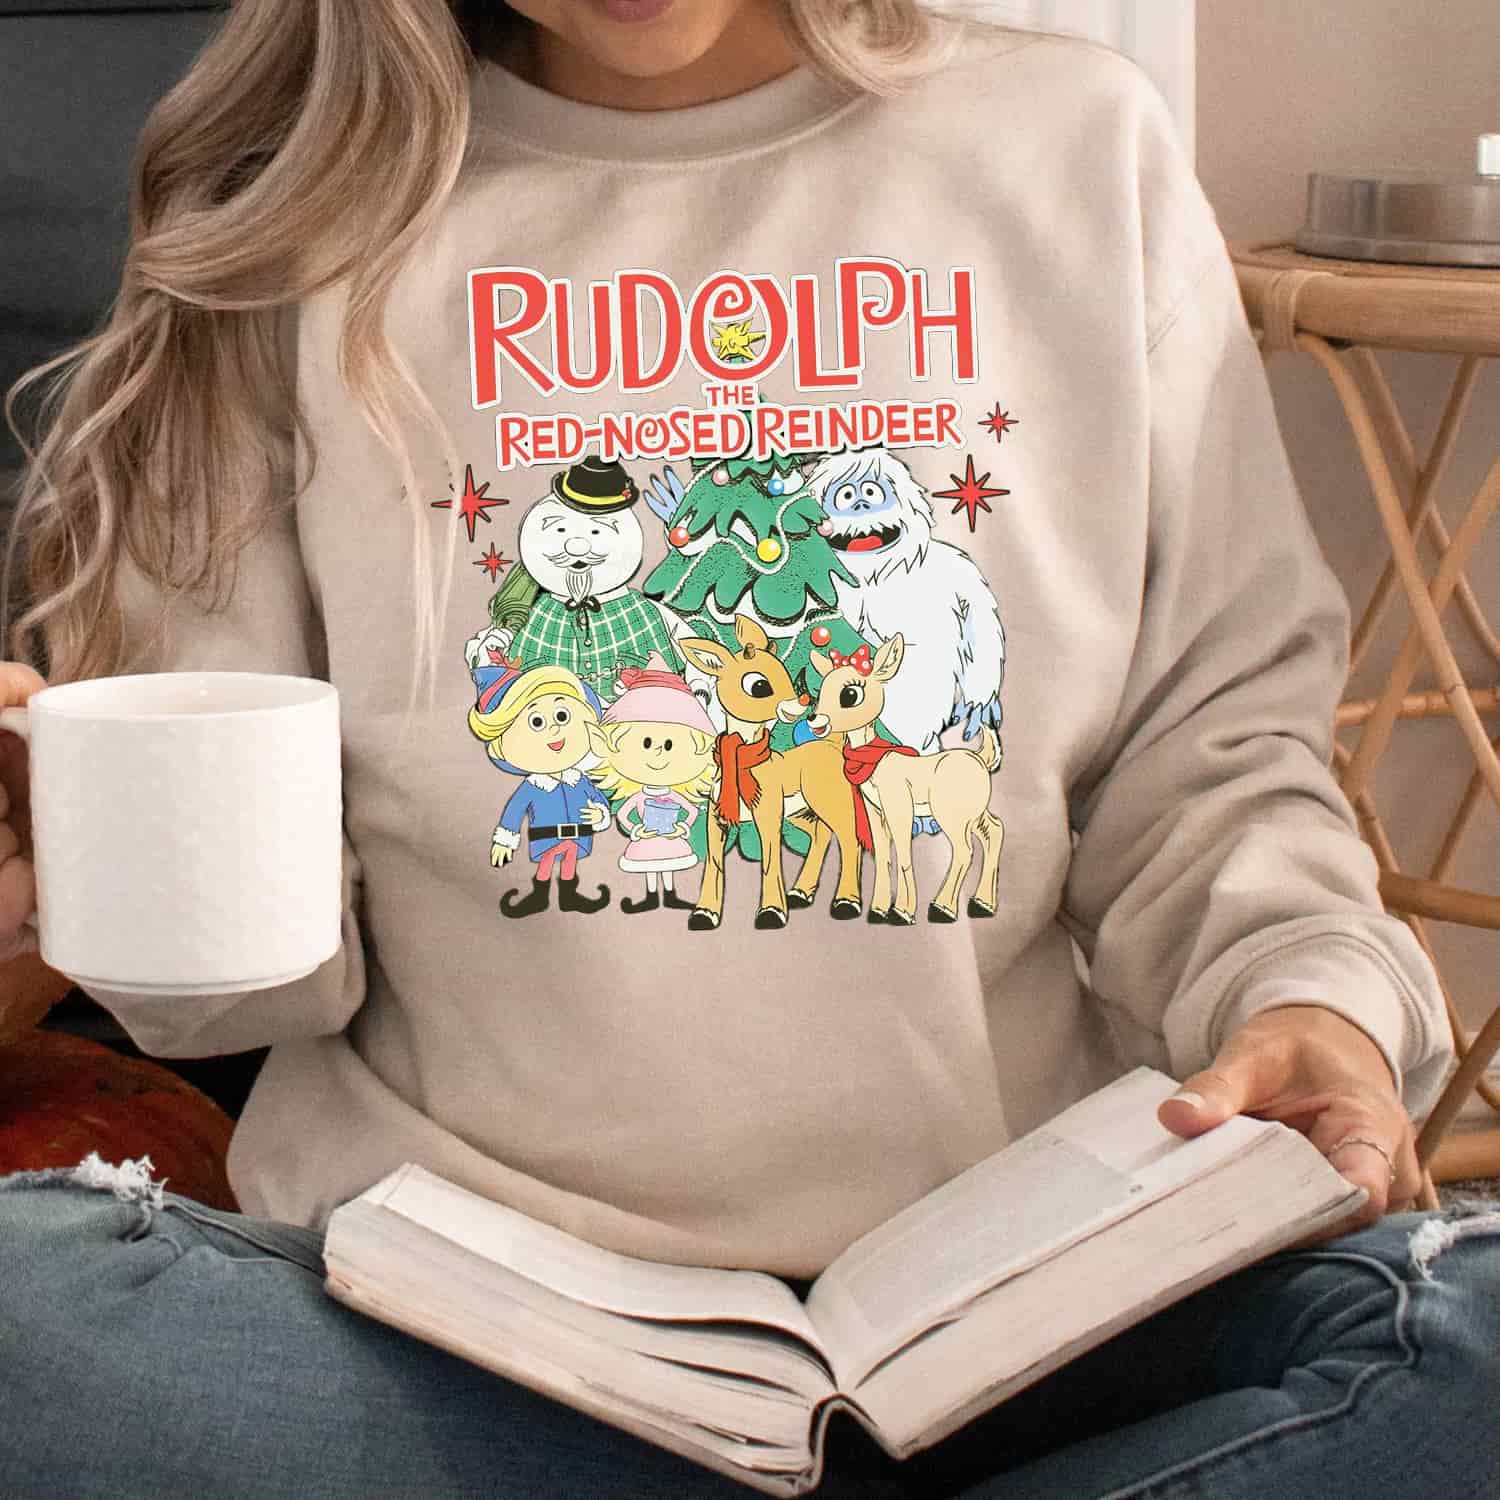 https://images.merchill.com/wp-content/uploads/2022/10/Rudolph-Shirt-Rudolph-The-Red-Nosed-Reindeer-Shirt-Amazing-Christmas-Gifts-1.jpg